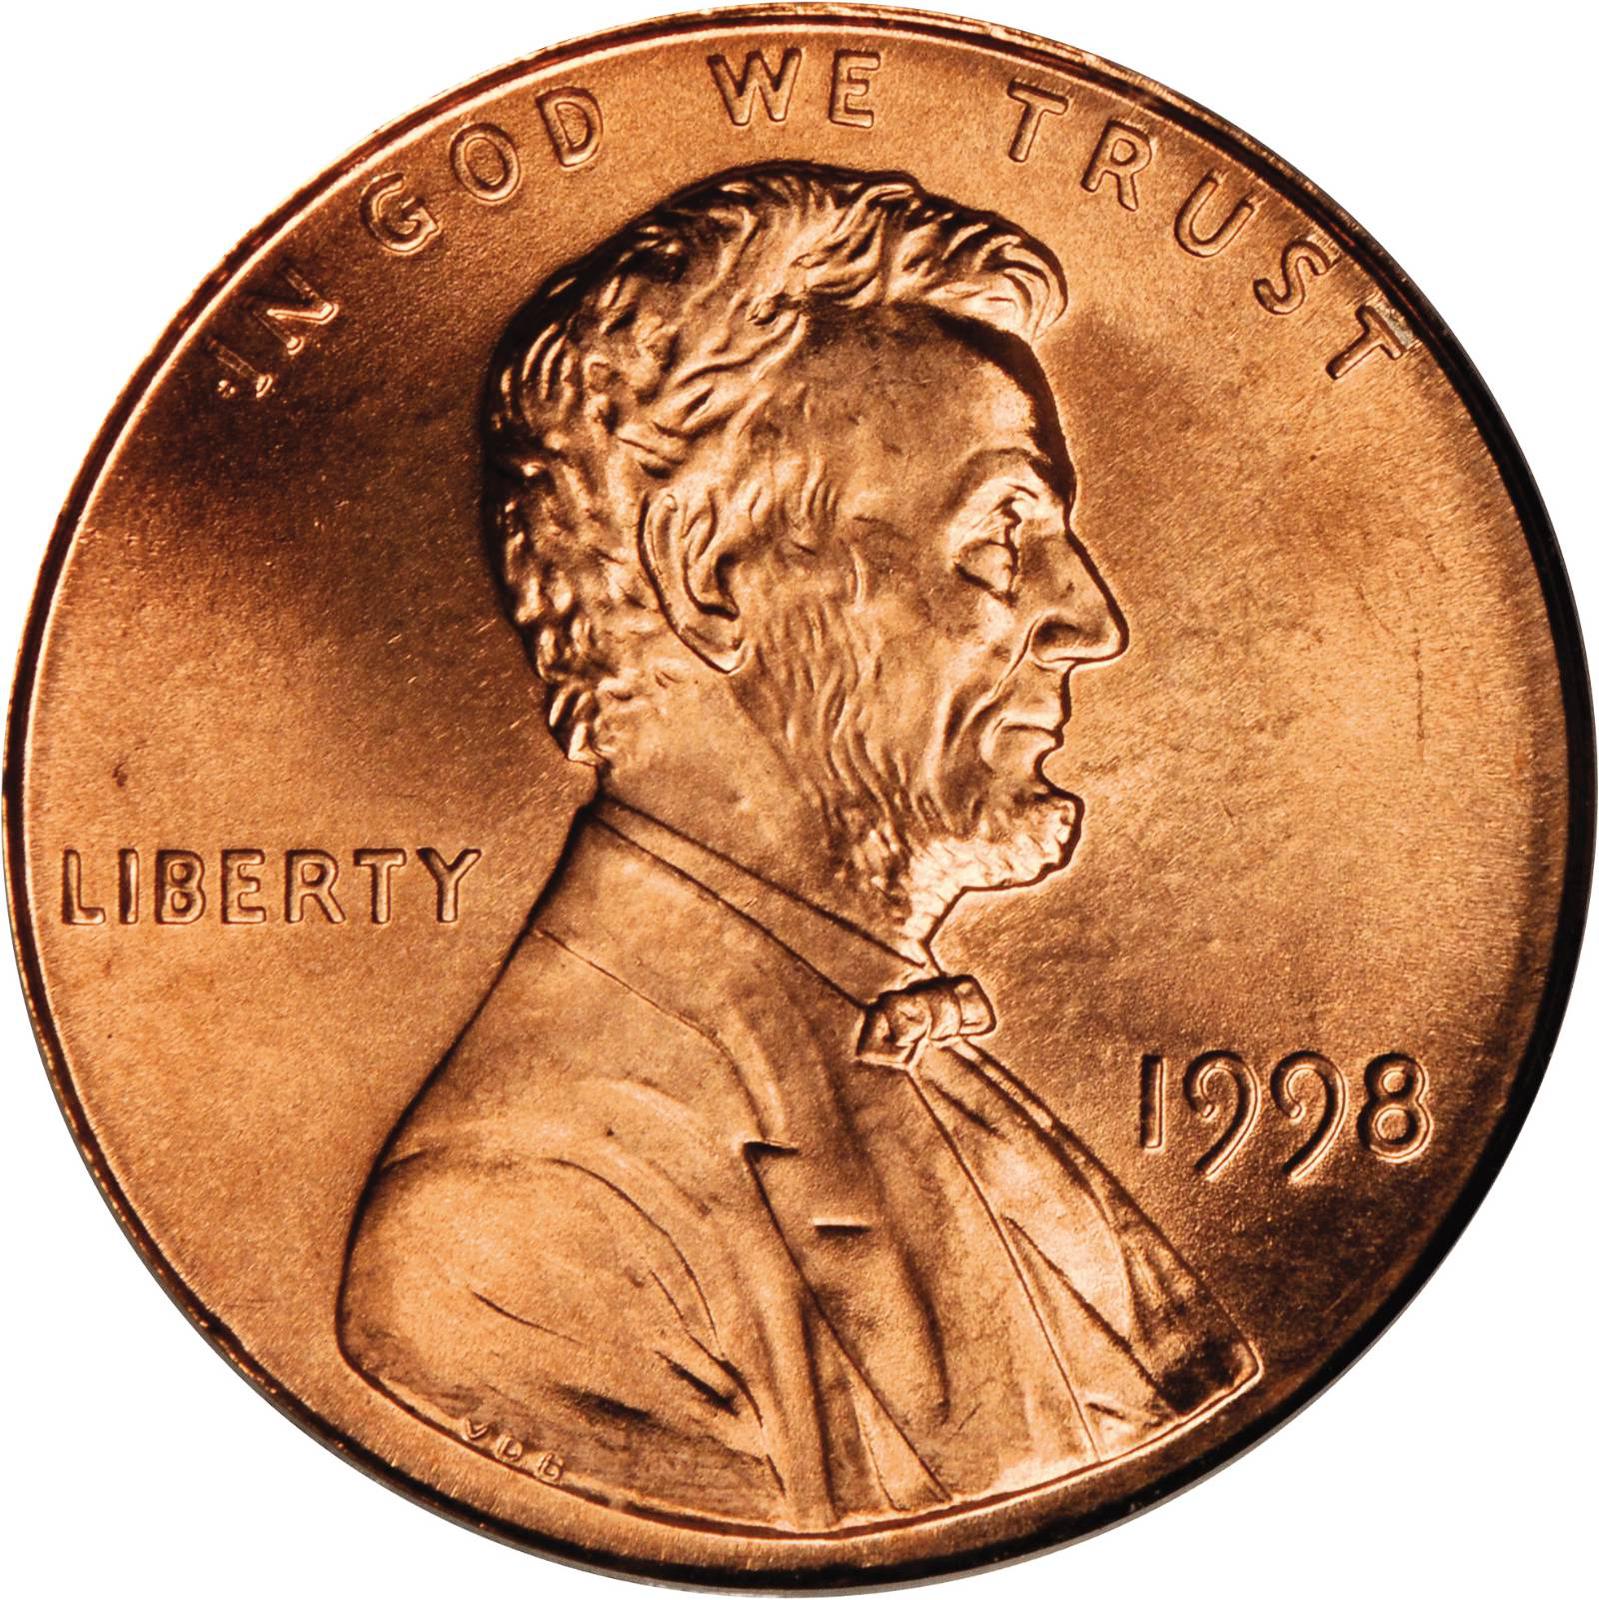 2017 one penny coin